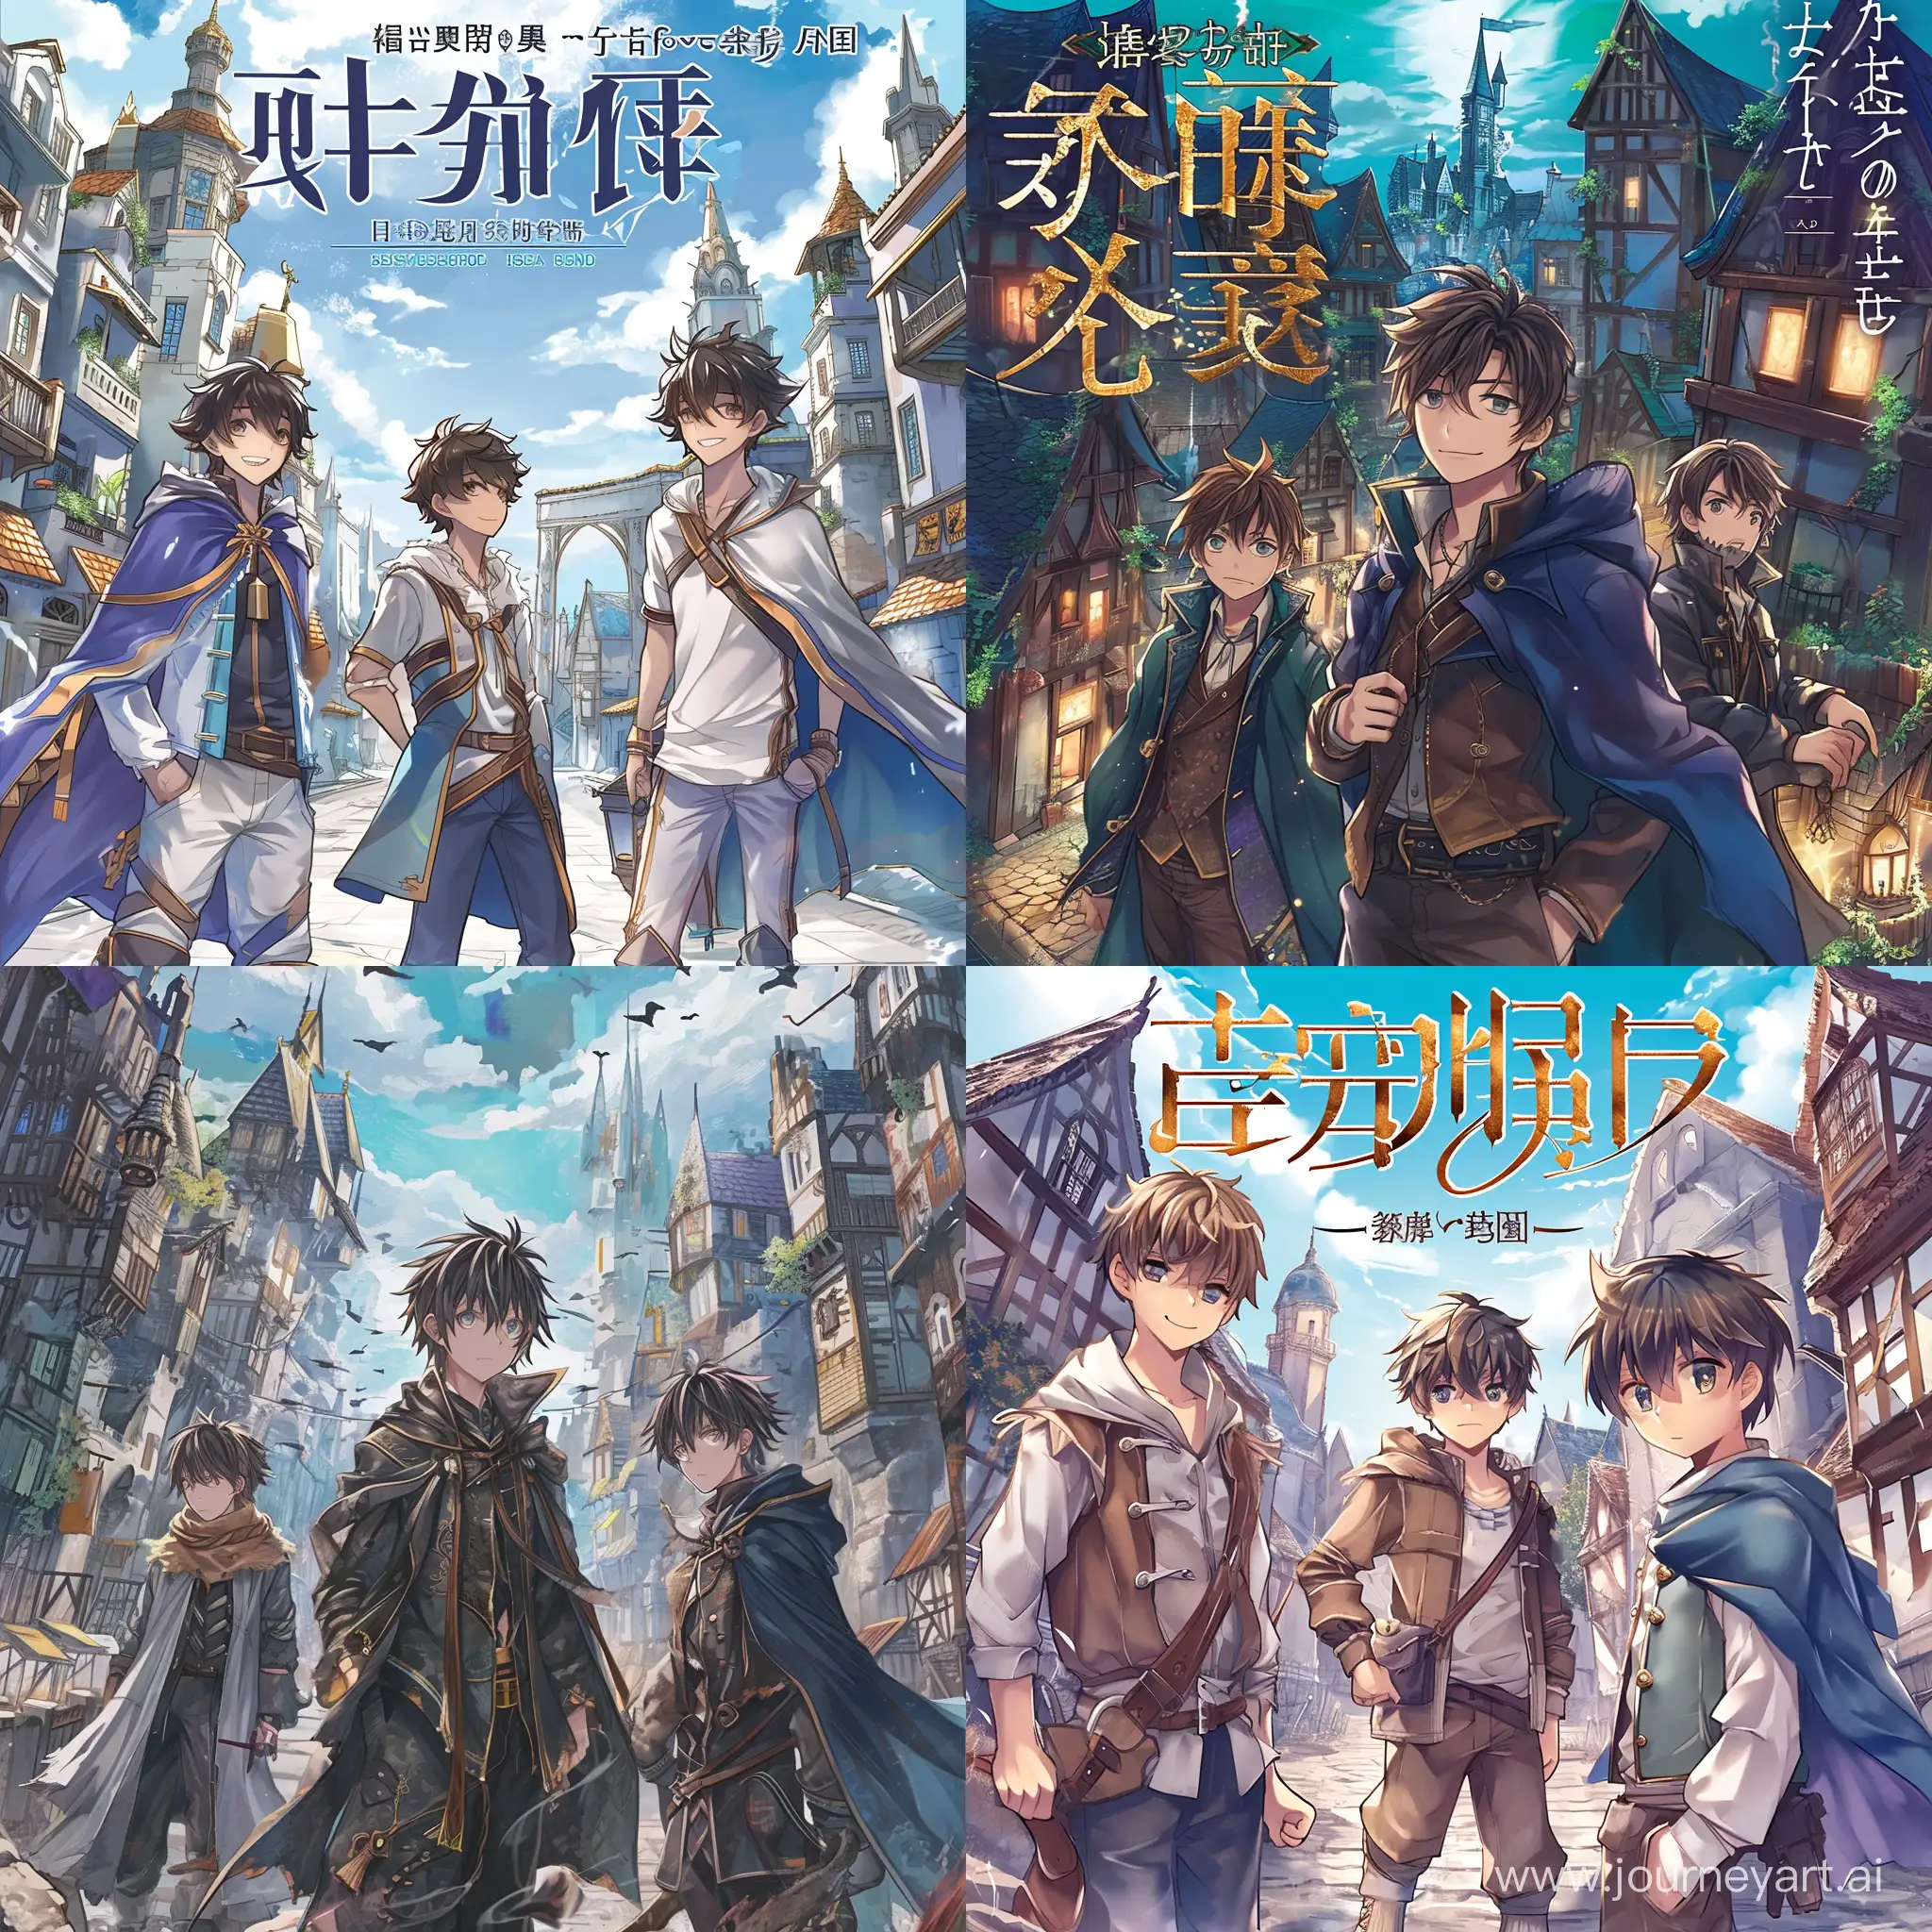 The cover for light novel, three boys and fantasy world with buildings, genres: fantasy and isekai.